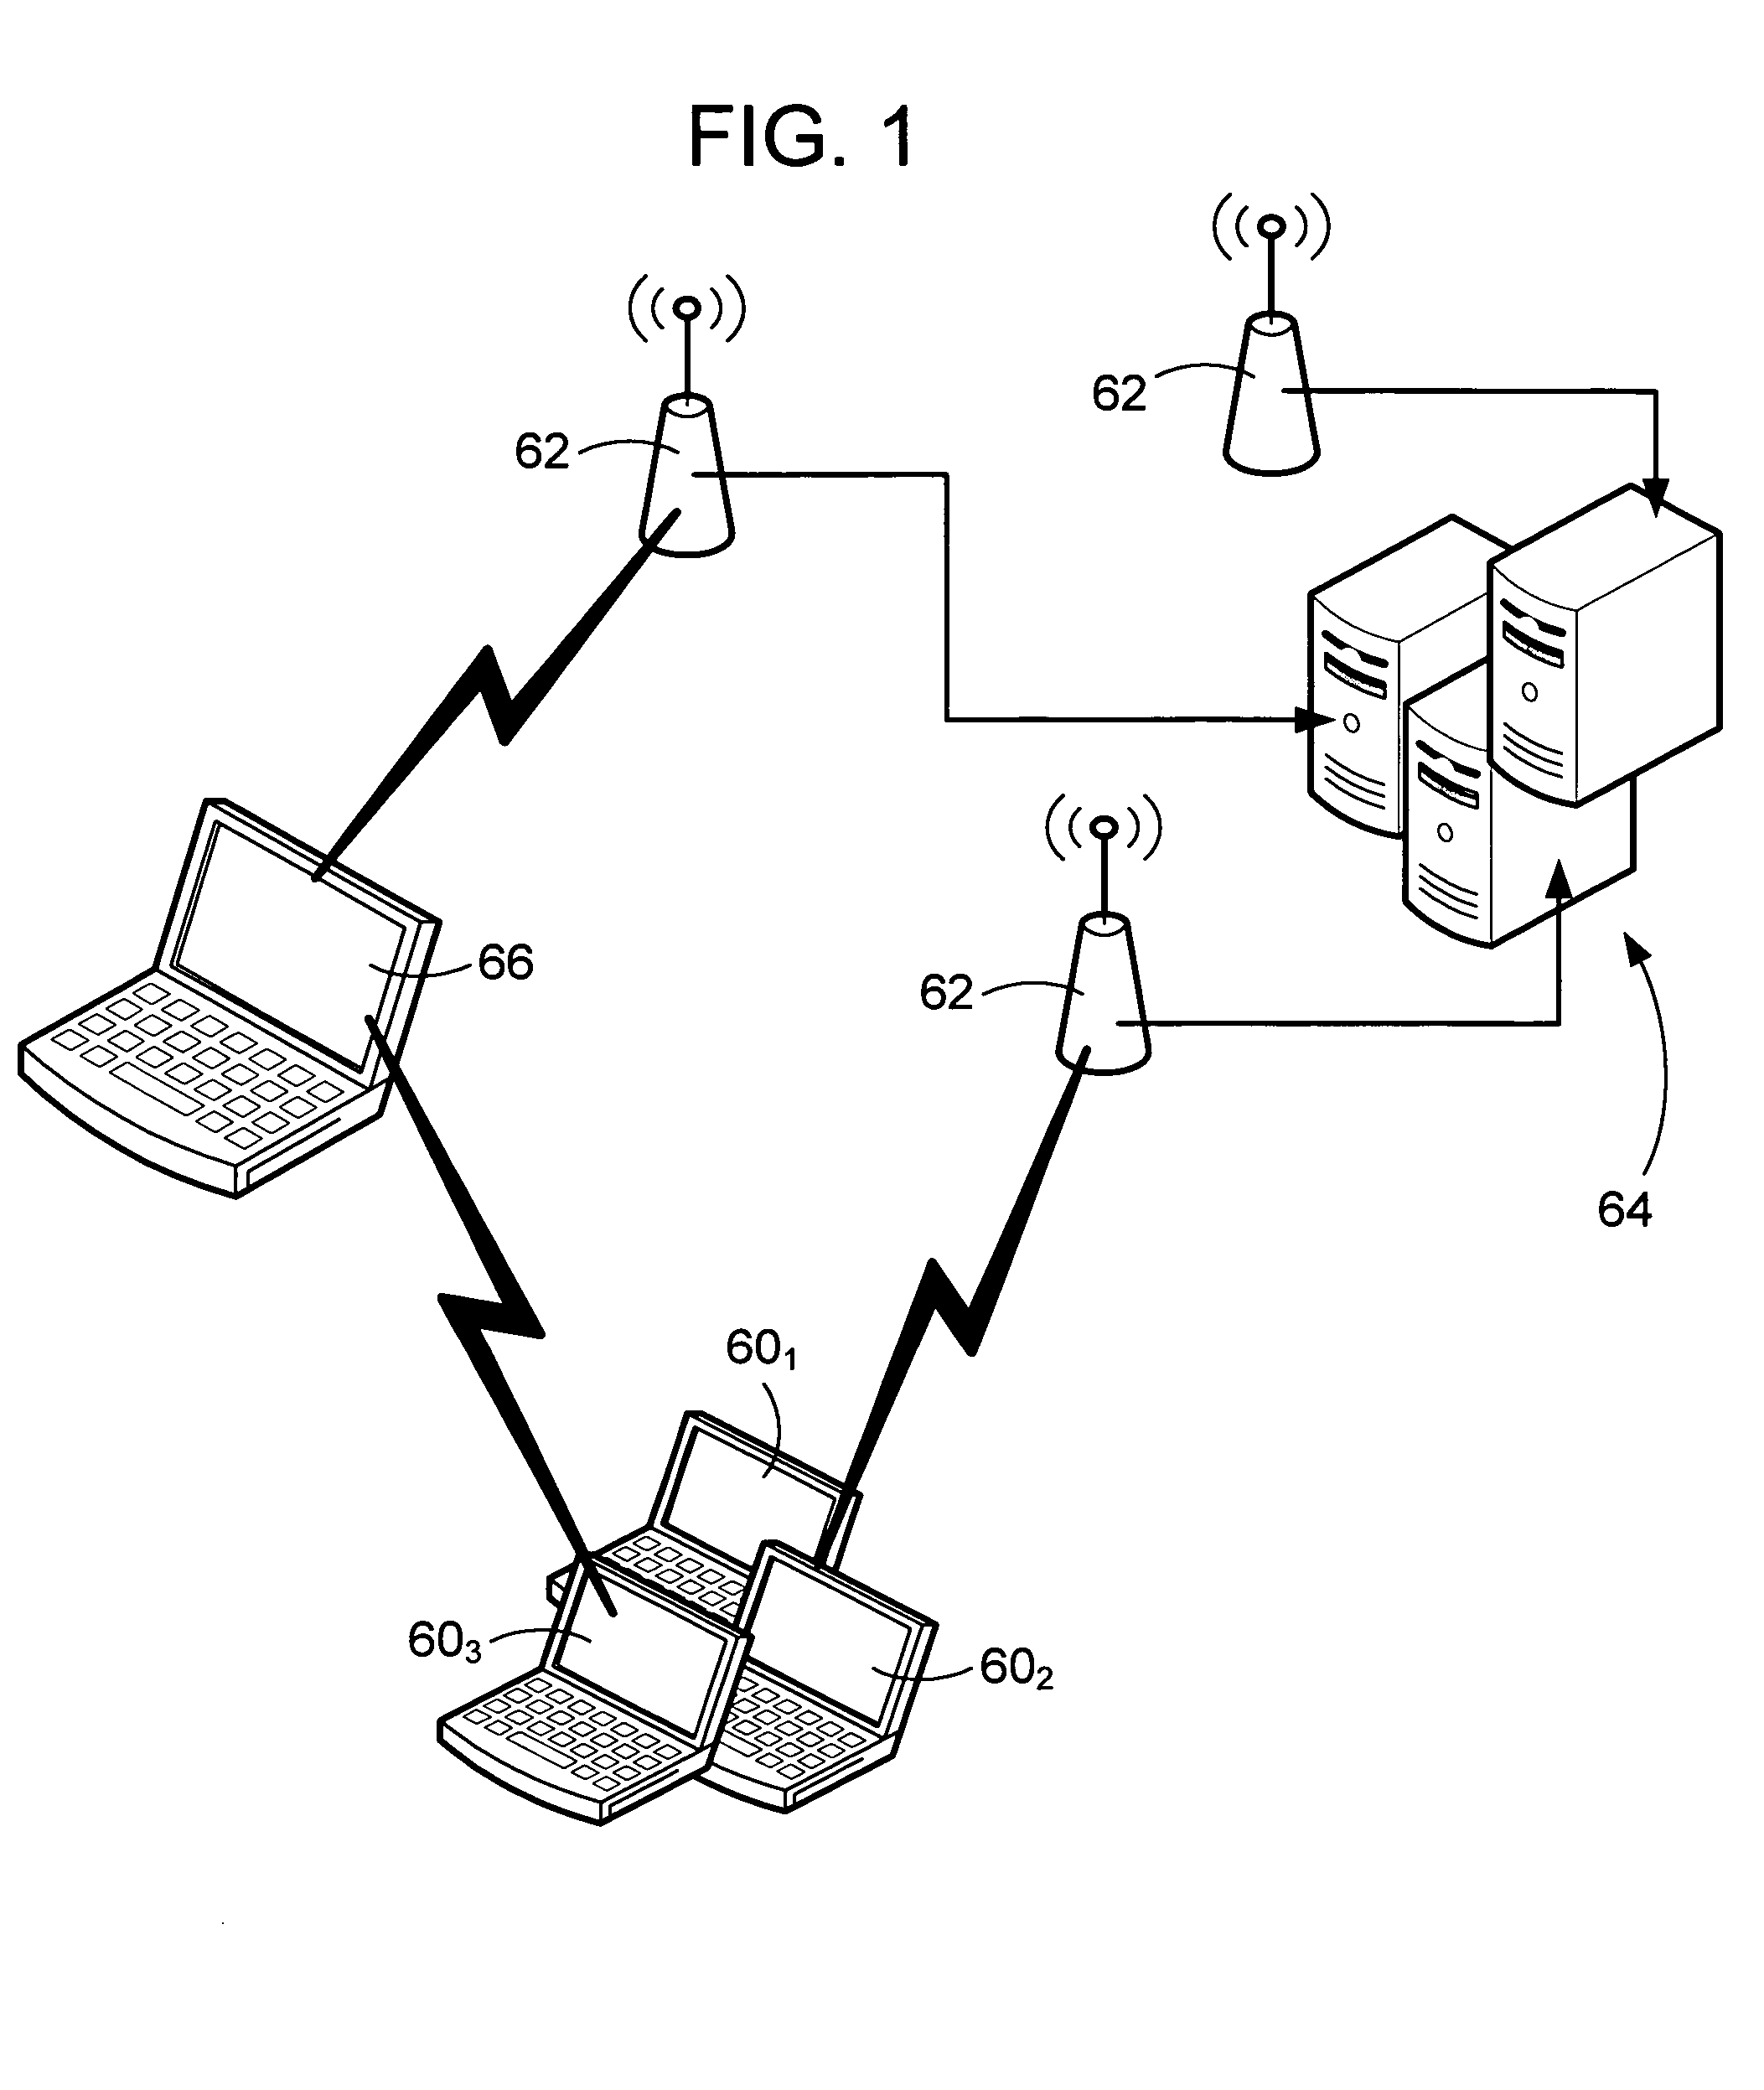 Method and apparatus for performing wireless diagnostics and troubleshooting